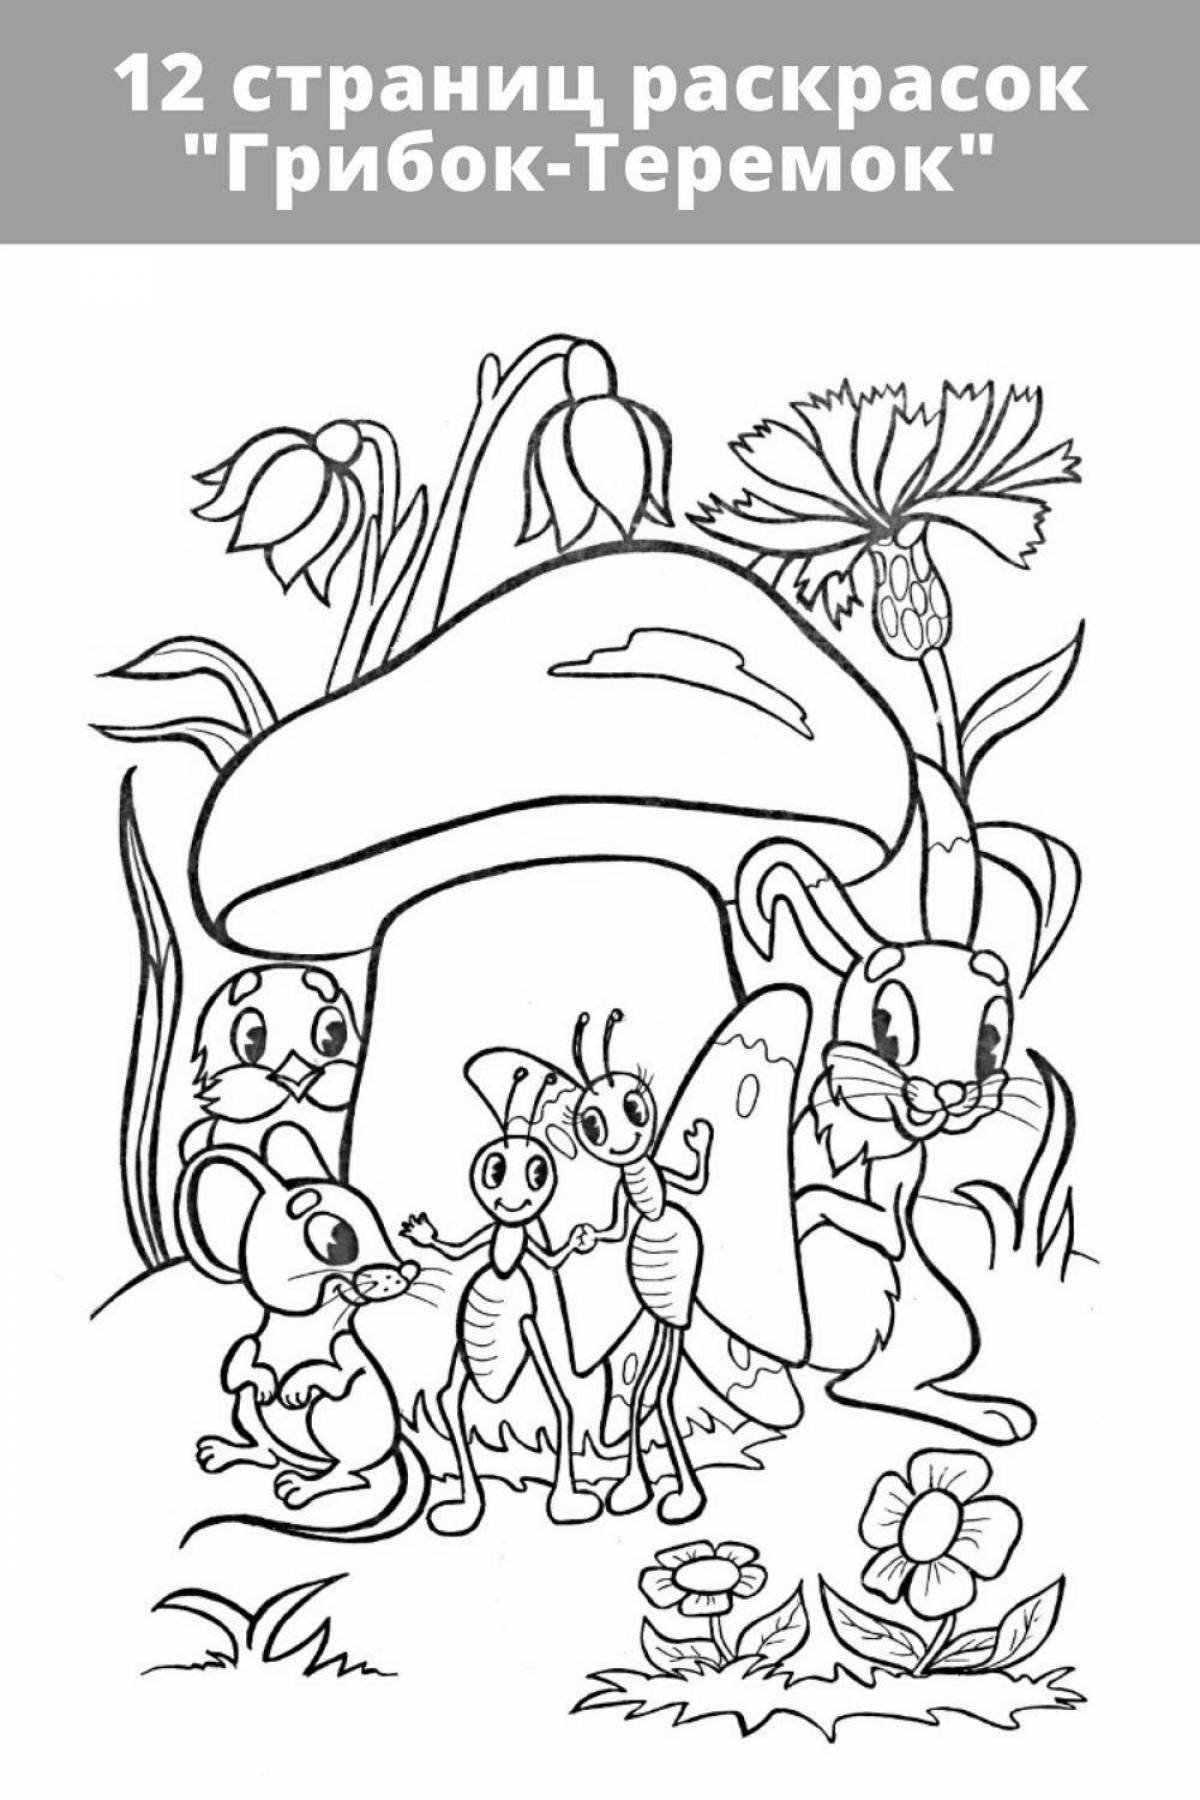 Captive coloring book for children based on fairy tales